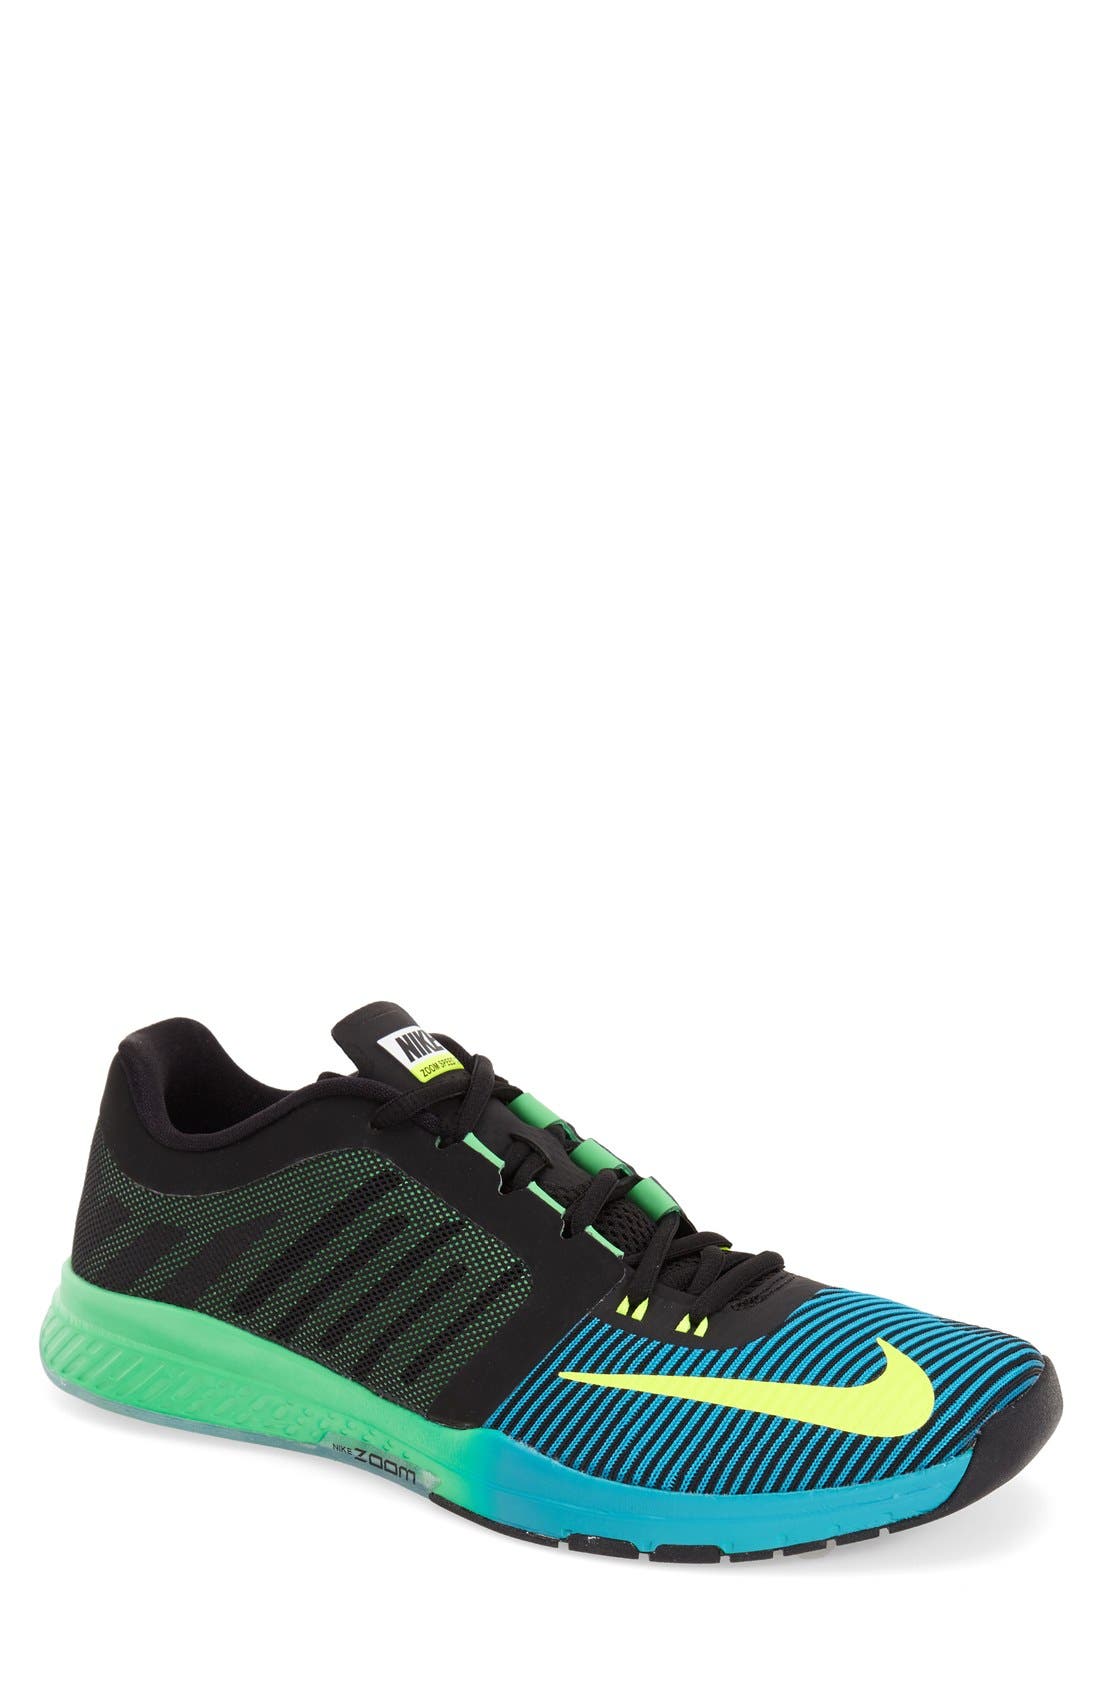 nike men's zoom speed tr 3 training shoes